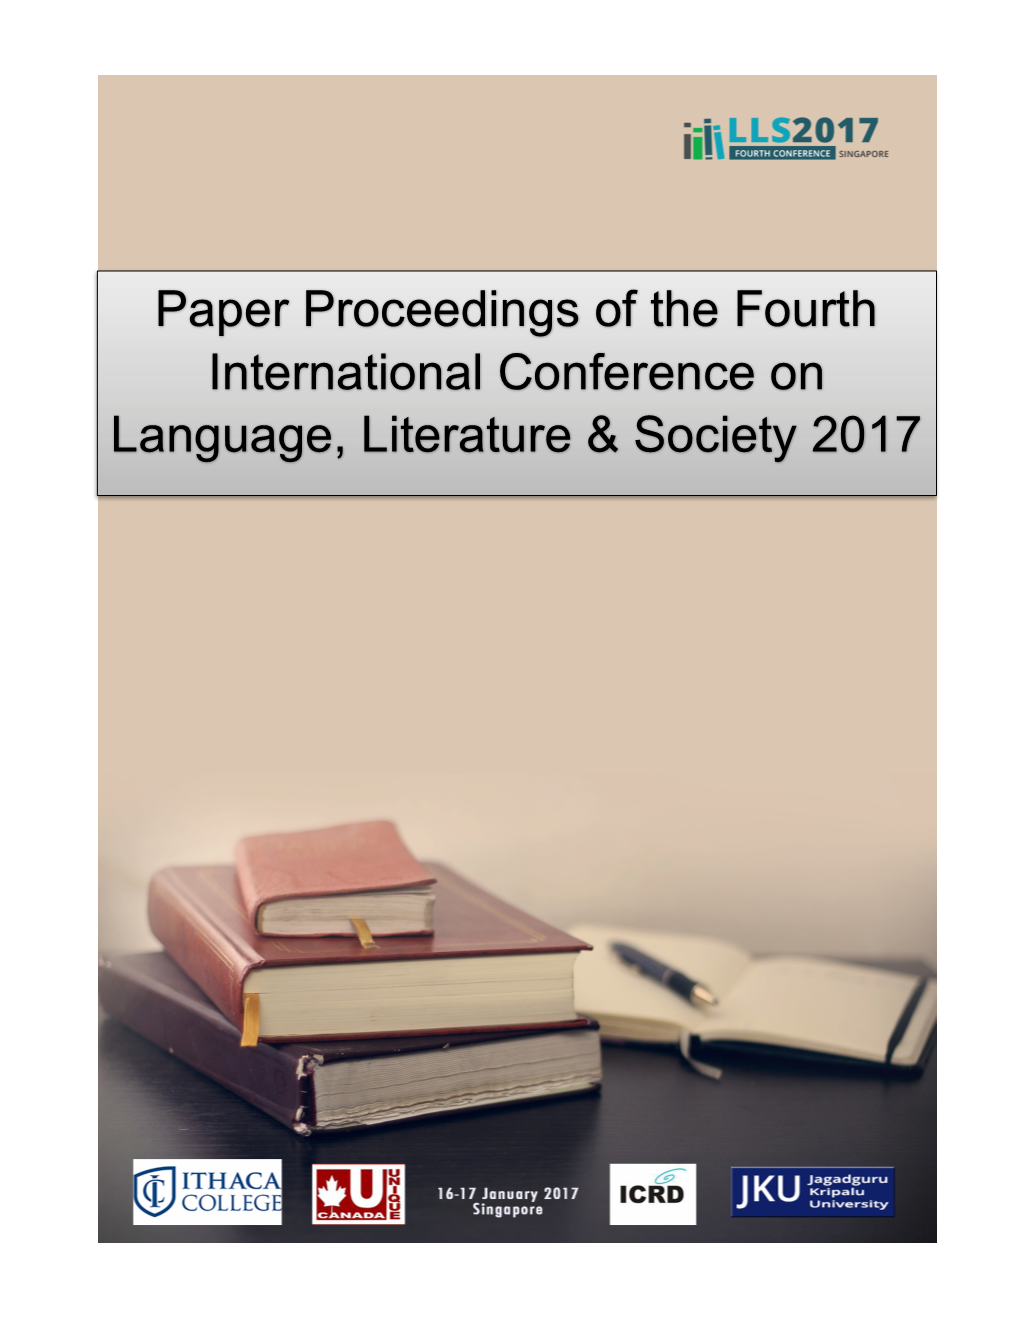 Paper Proceedings of the Fourth International Conference on Language, Literature & Society 2017